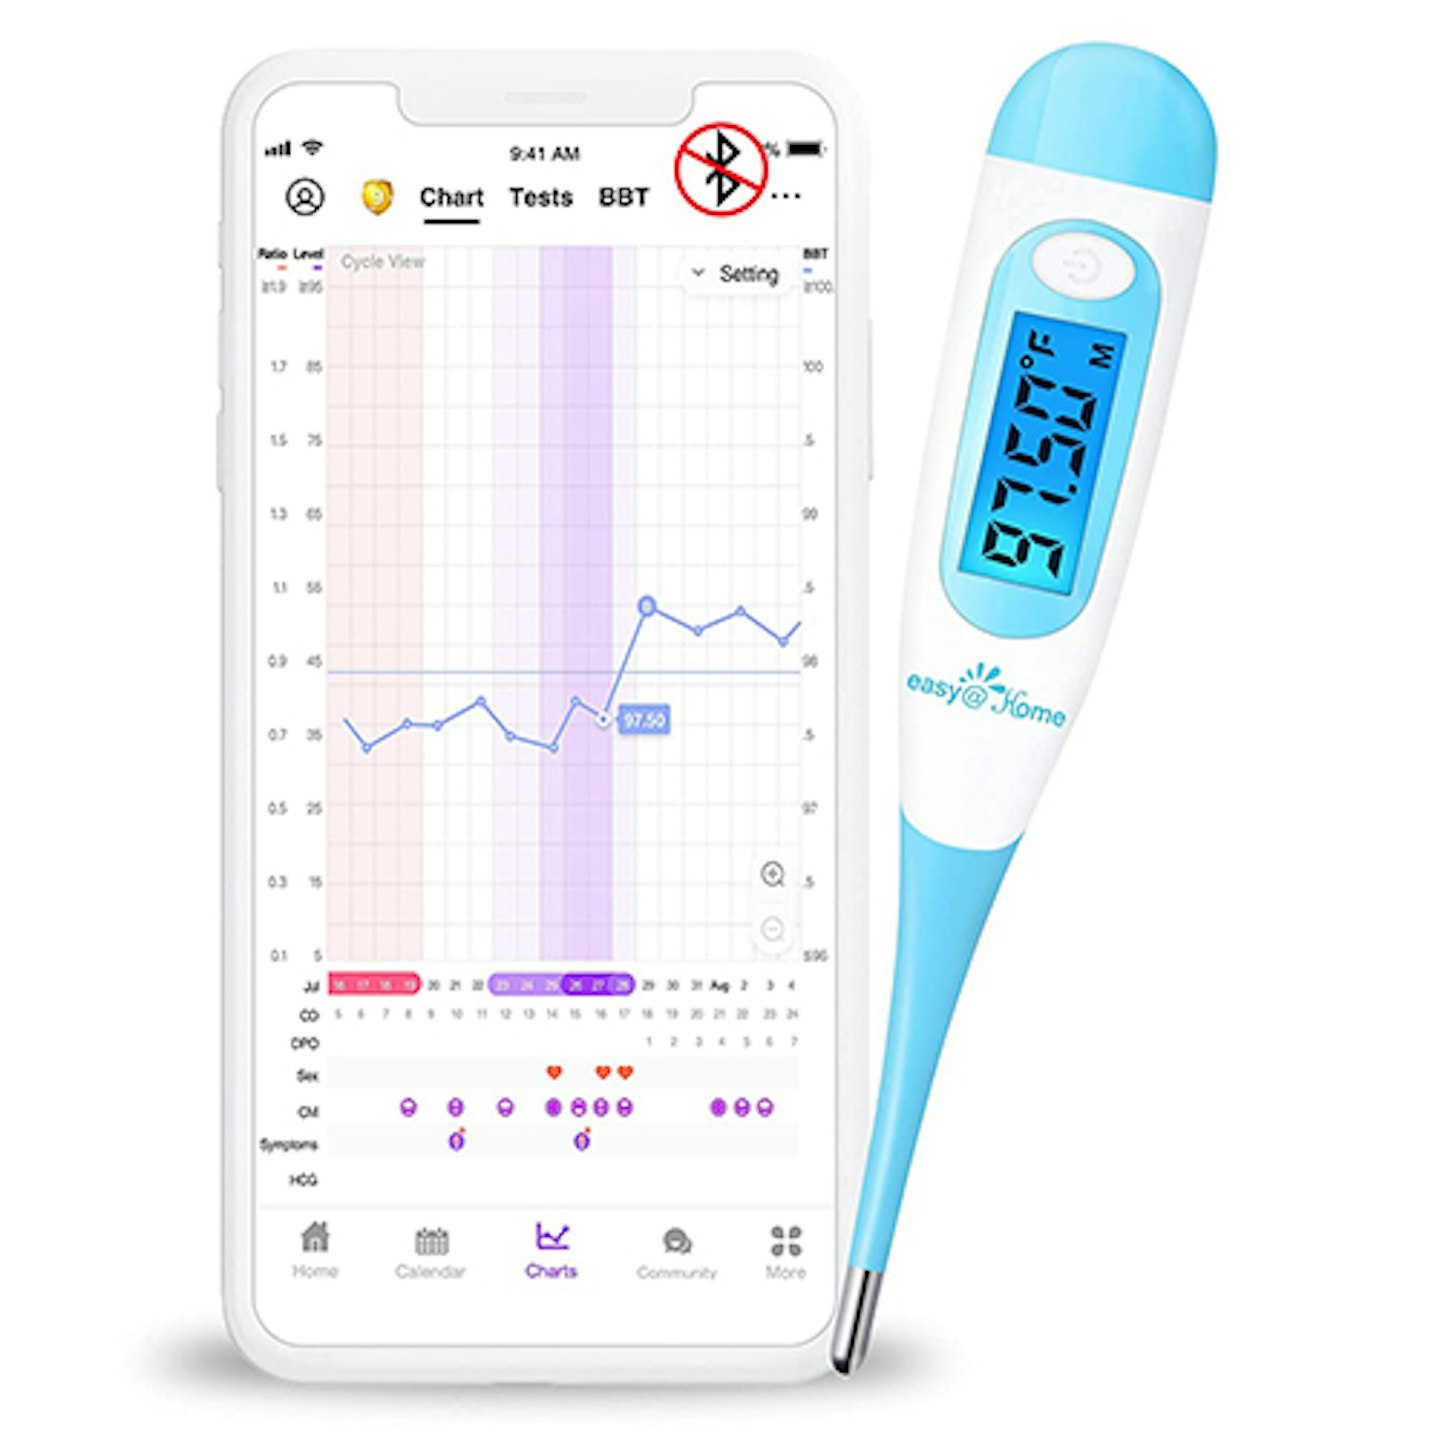 How To Track Basal Body Temperature - My Expert Midwife